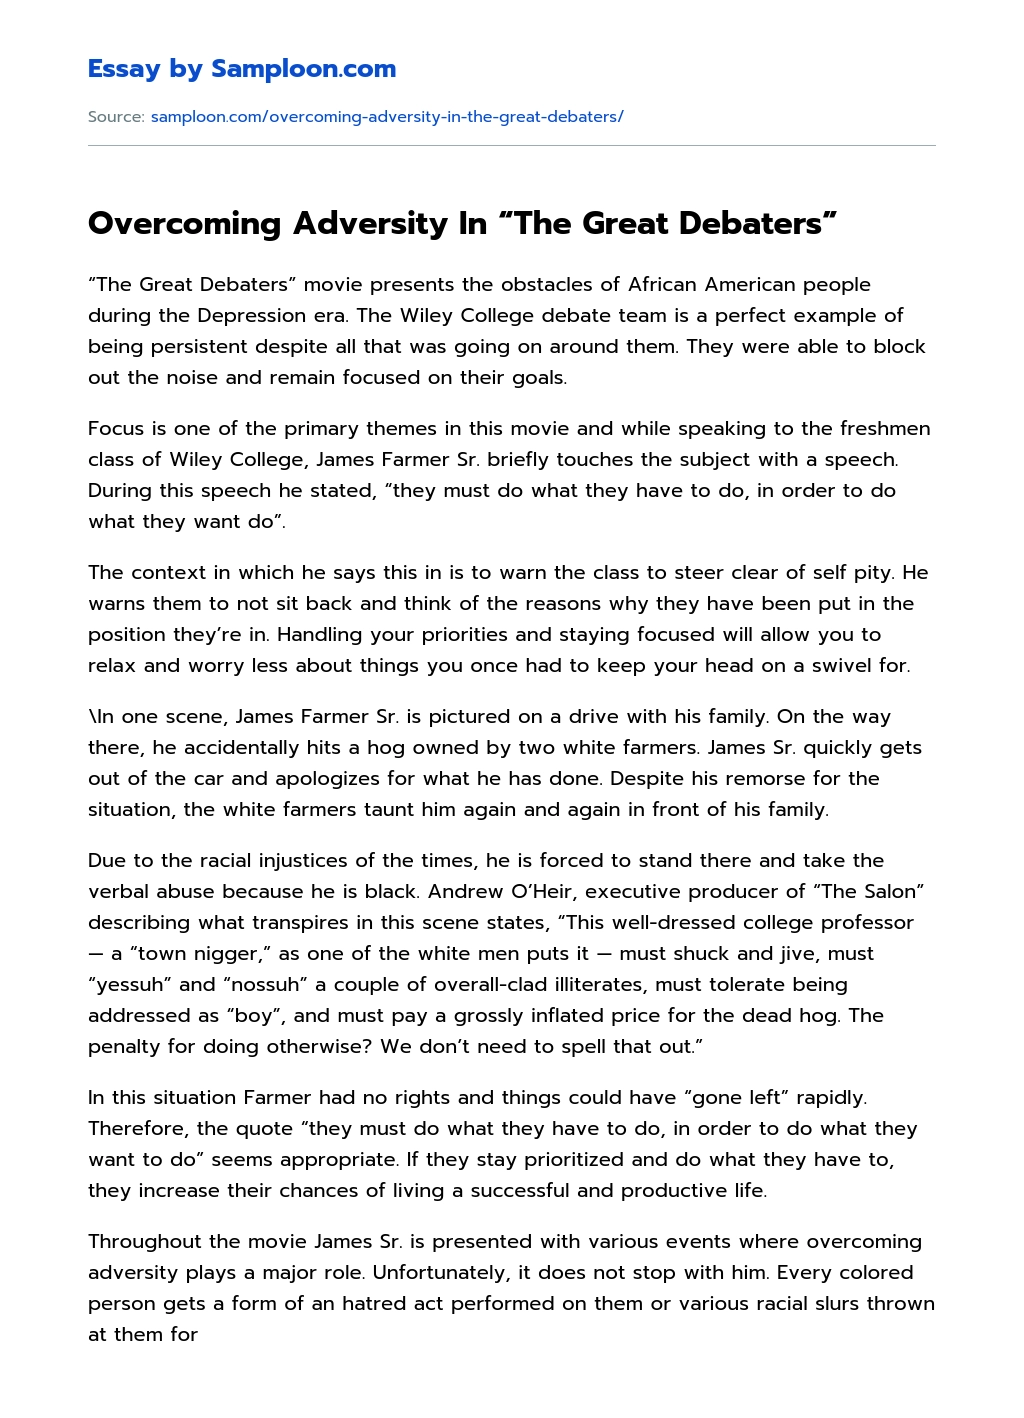 Overcoming Adversity In “The Great Debaters” Character Analysis essay